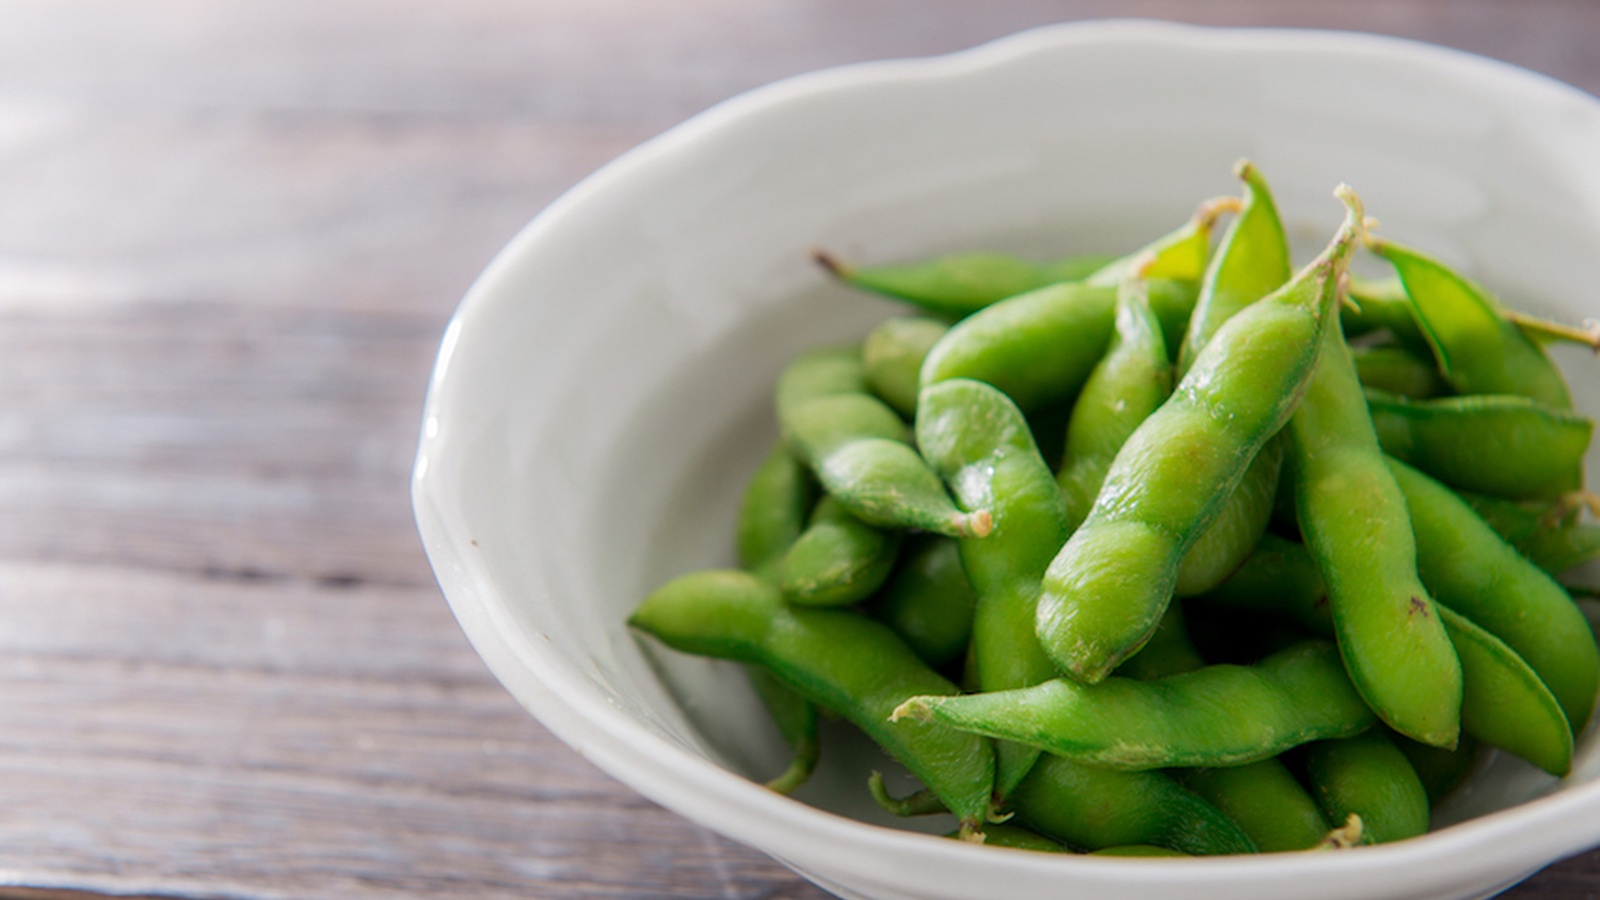 Edamame: When Green and Natural Doesn't Equal Healthy